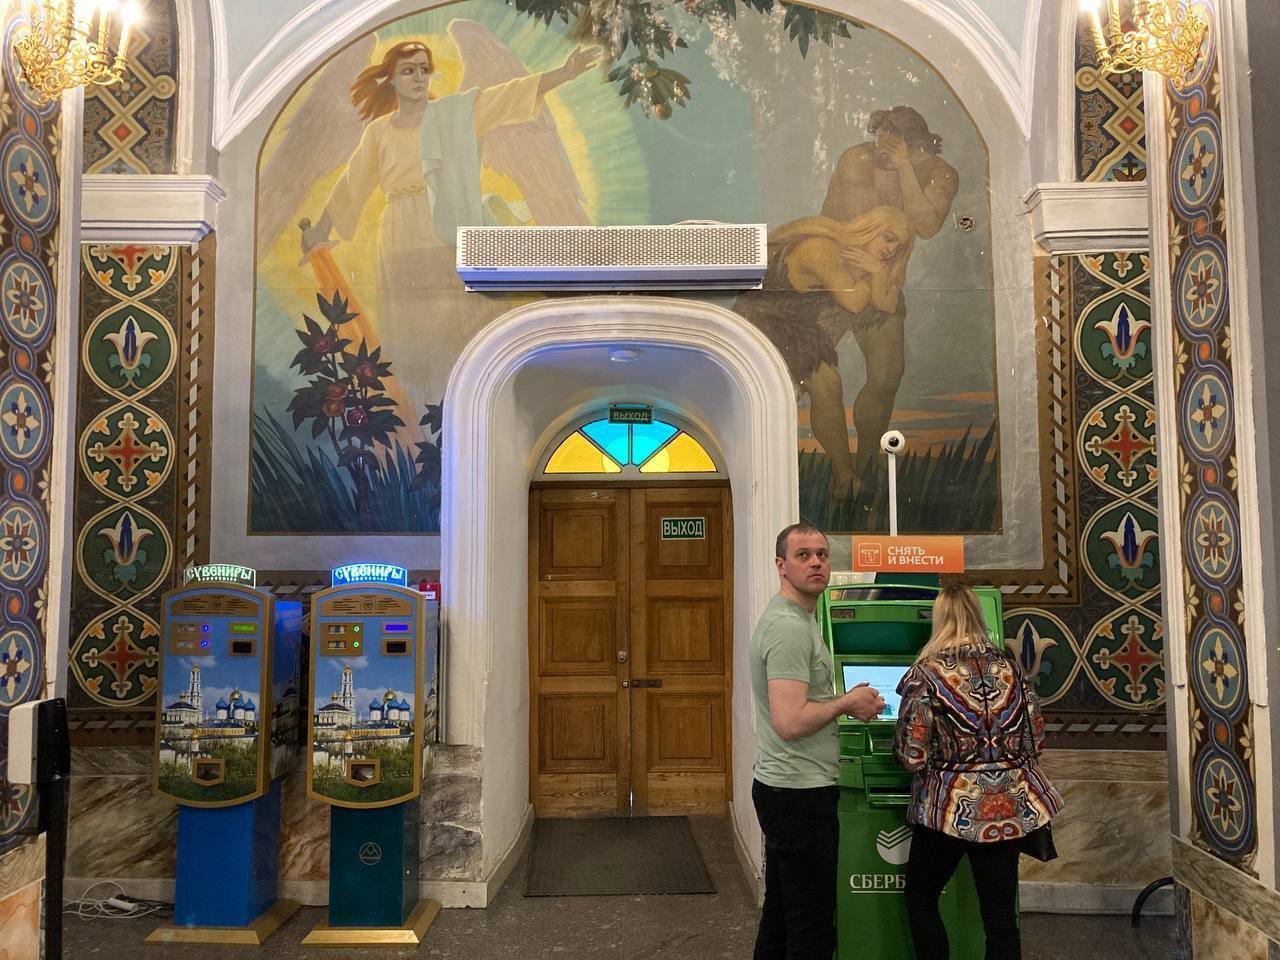 A Sberbank ATM opened in The Holy Trinity-St. Sergius Lavra